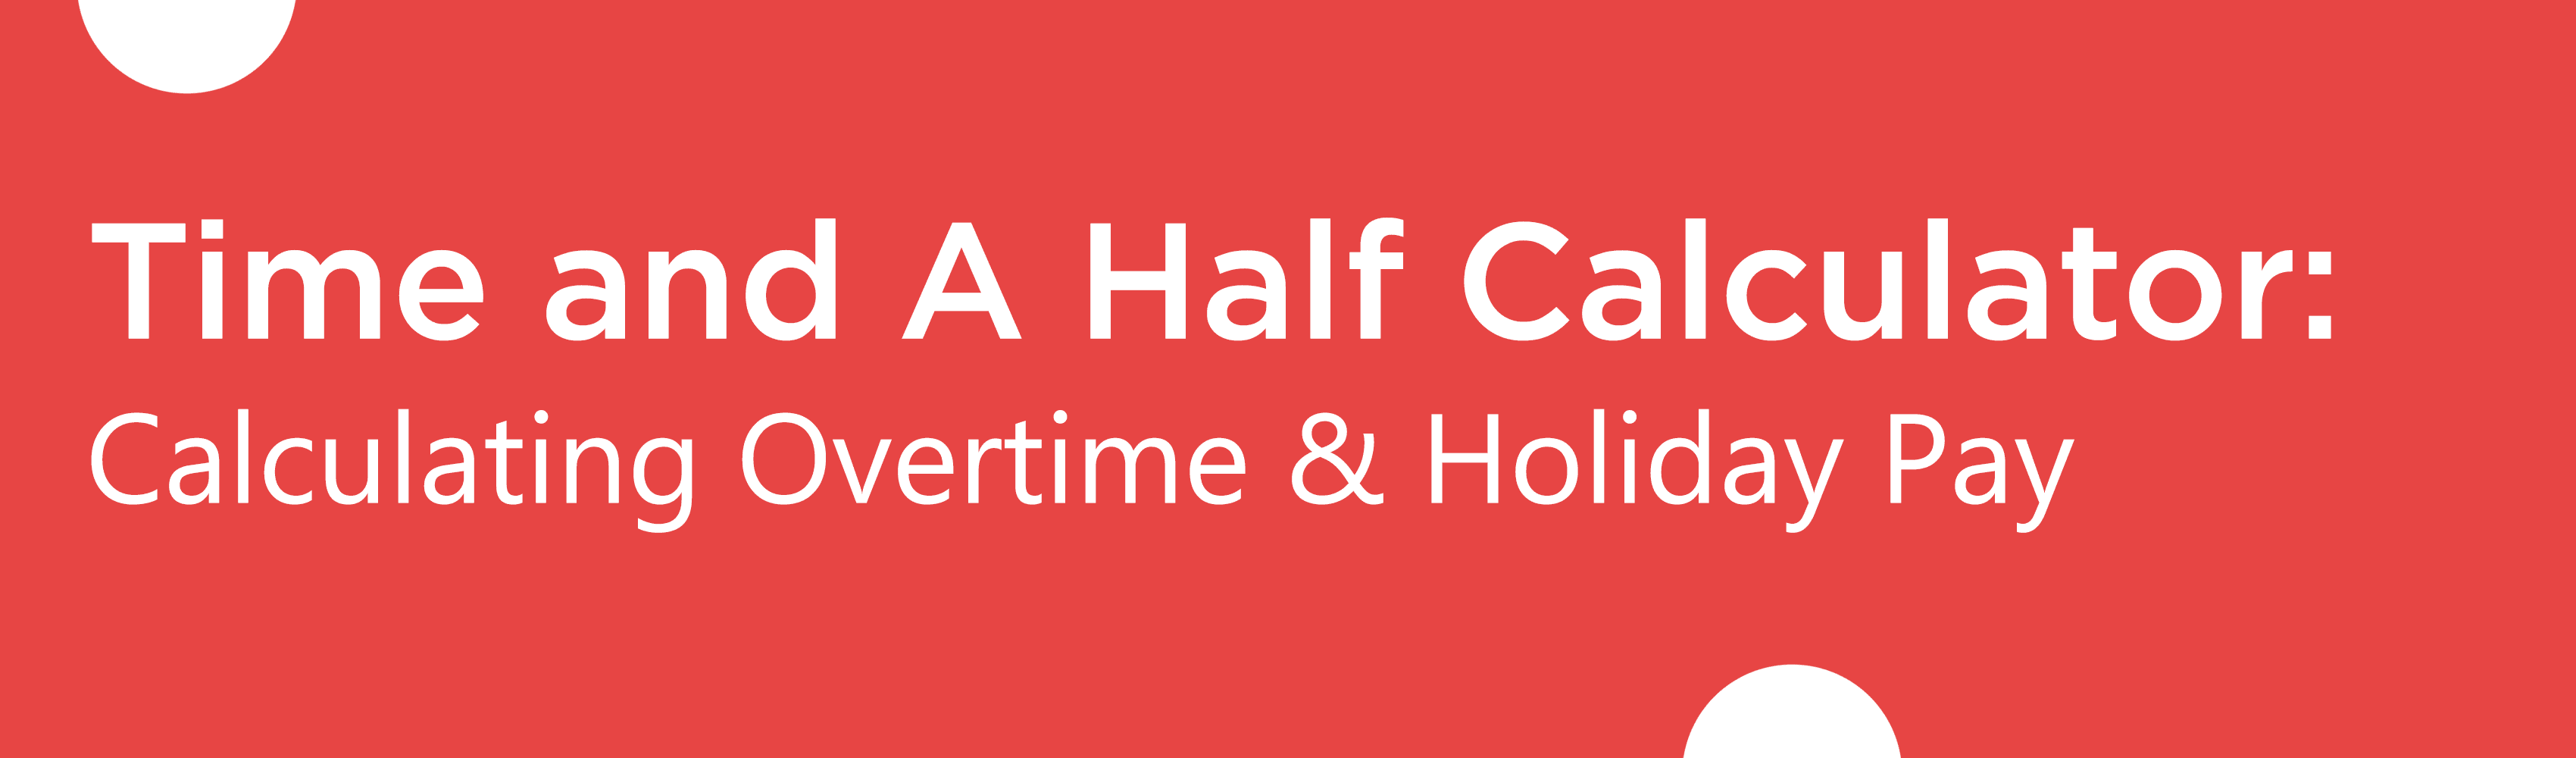 Time and A Half Calculator: Calculating Overtime & Holiday Pay